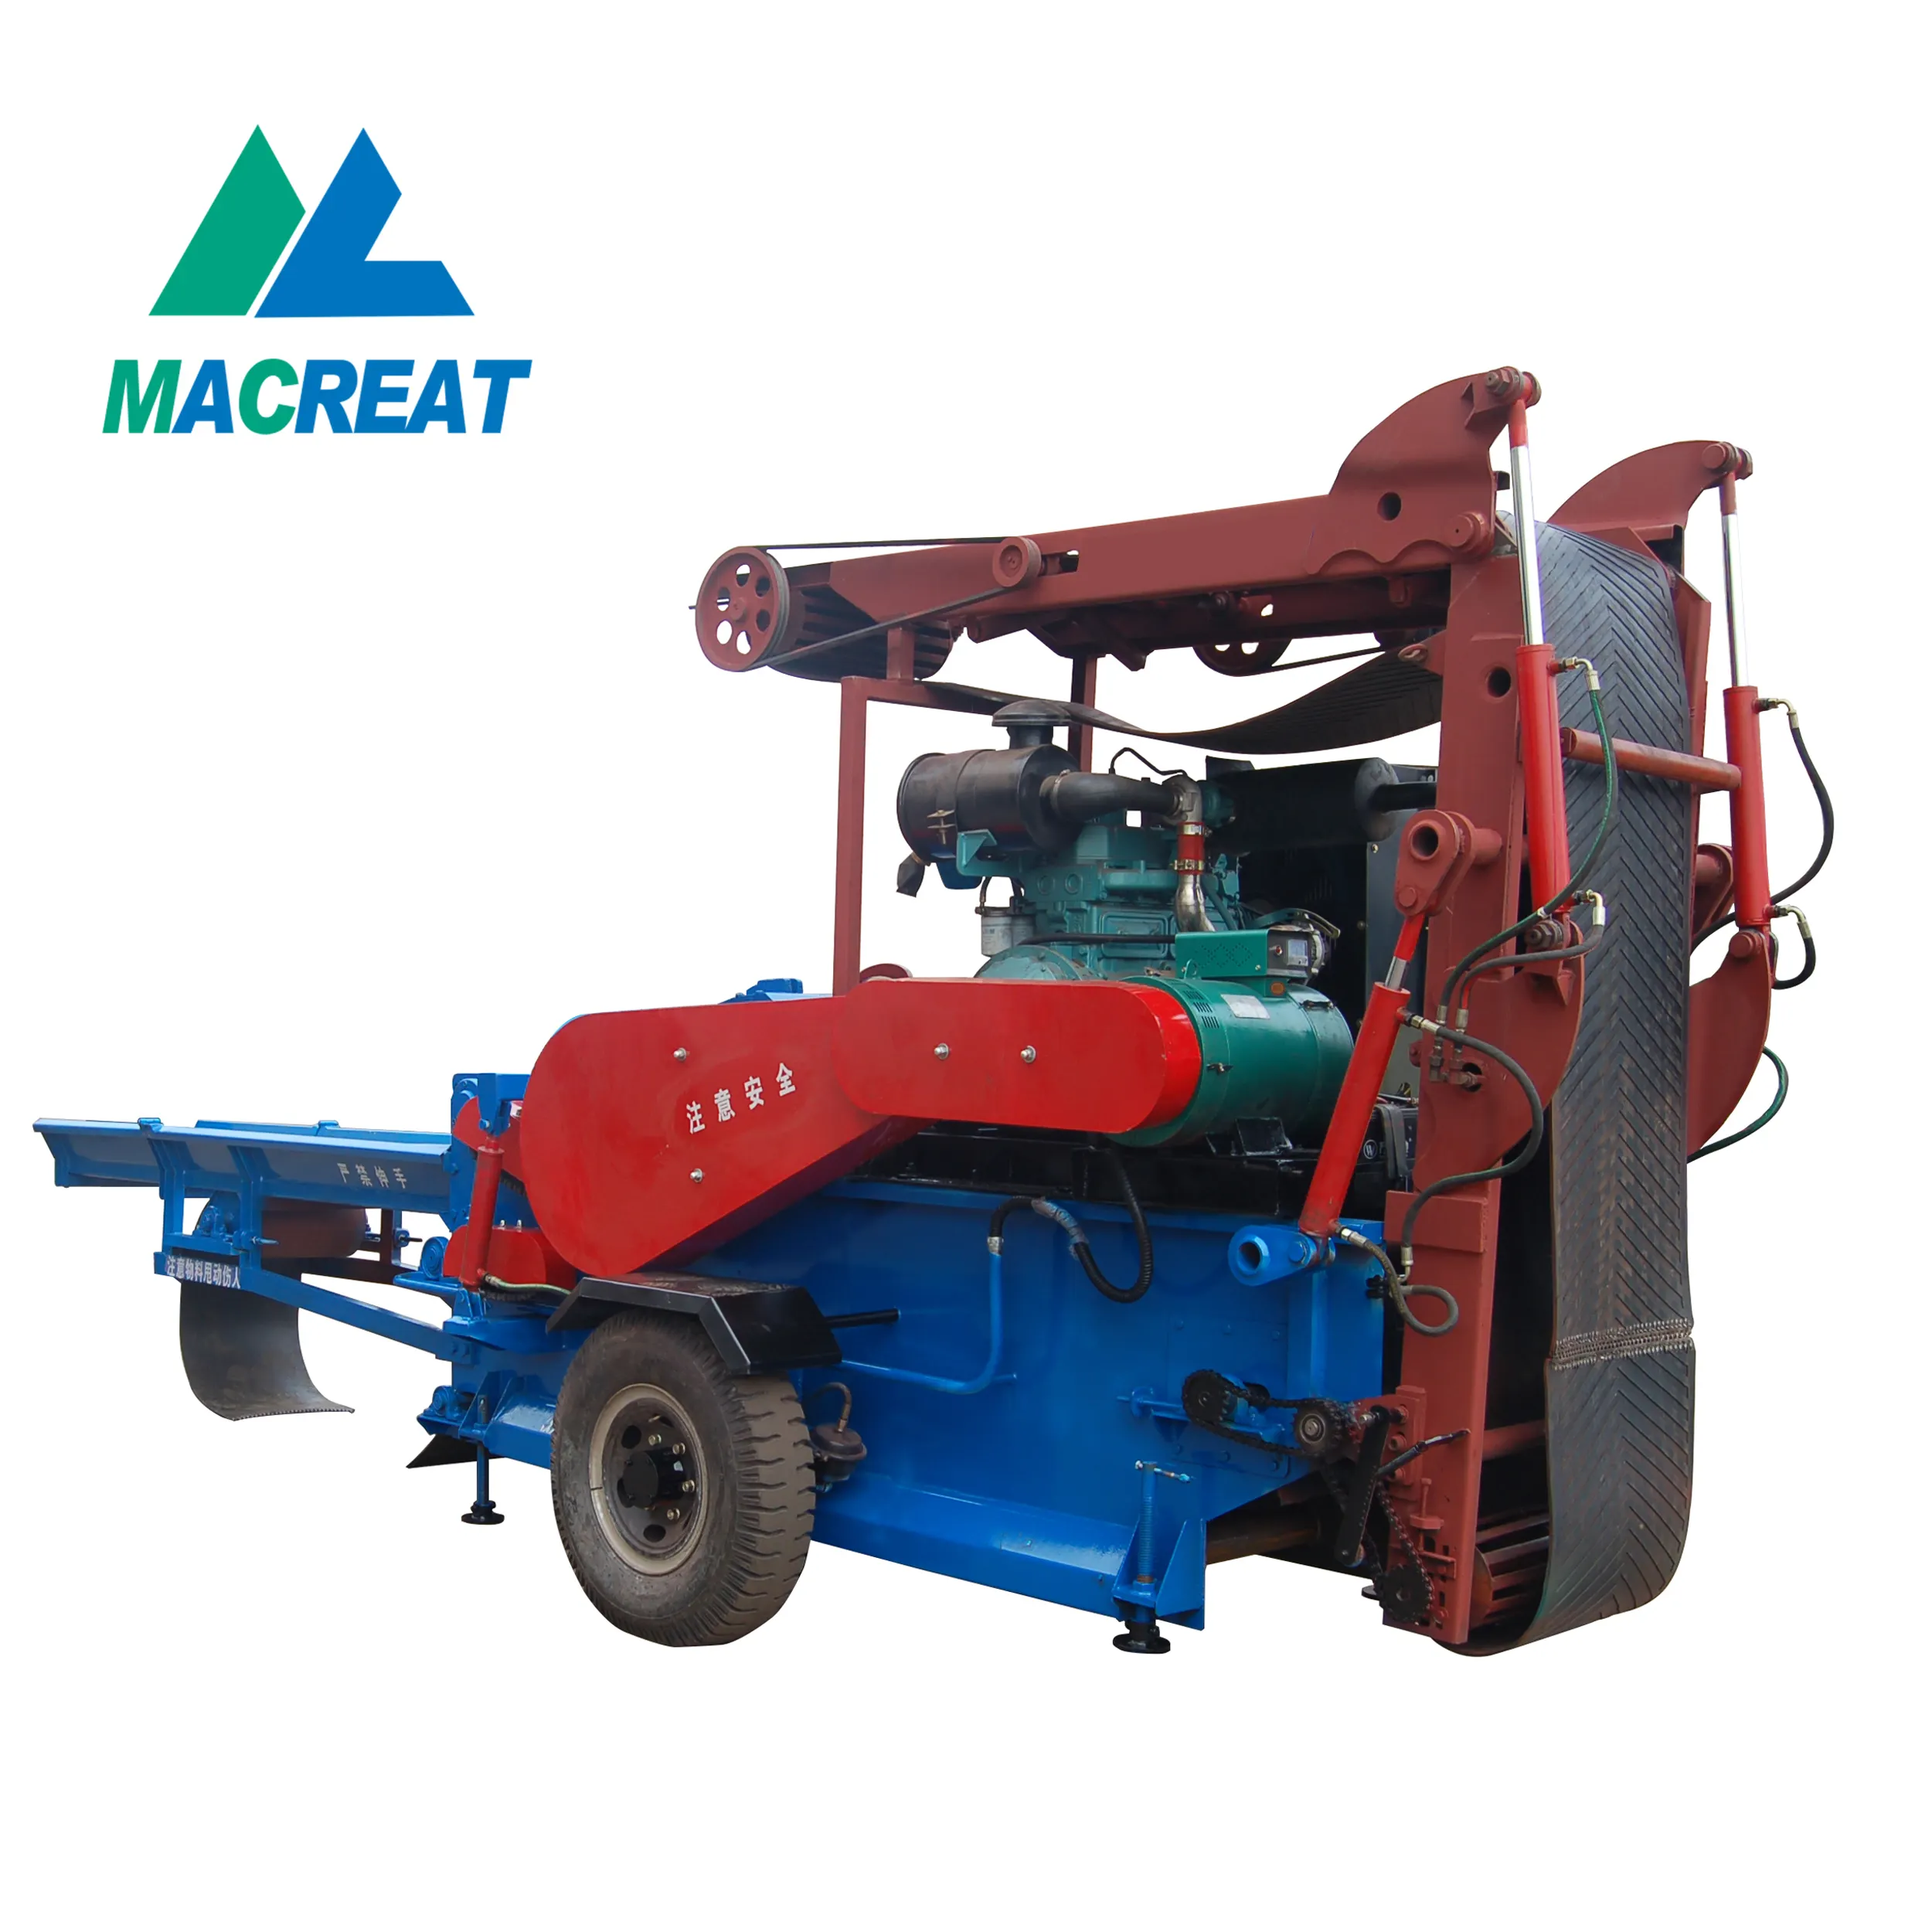 MACREAT Top-selling products in 2020 easy to operate diesel wood chippe log chipper forestry machine LDBX218